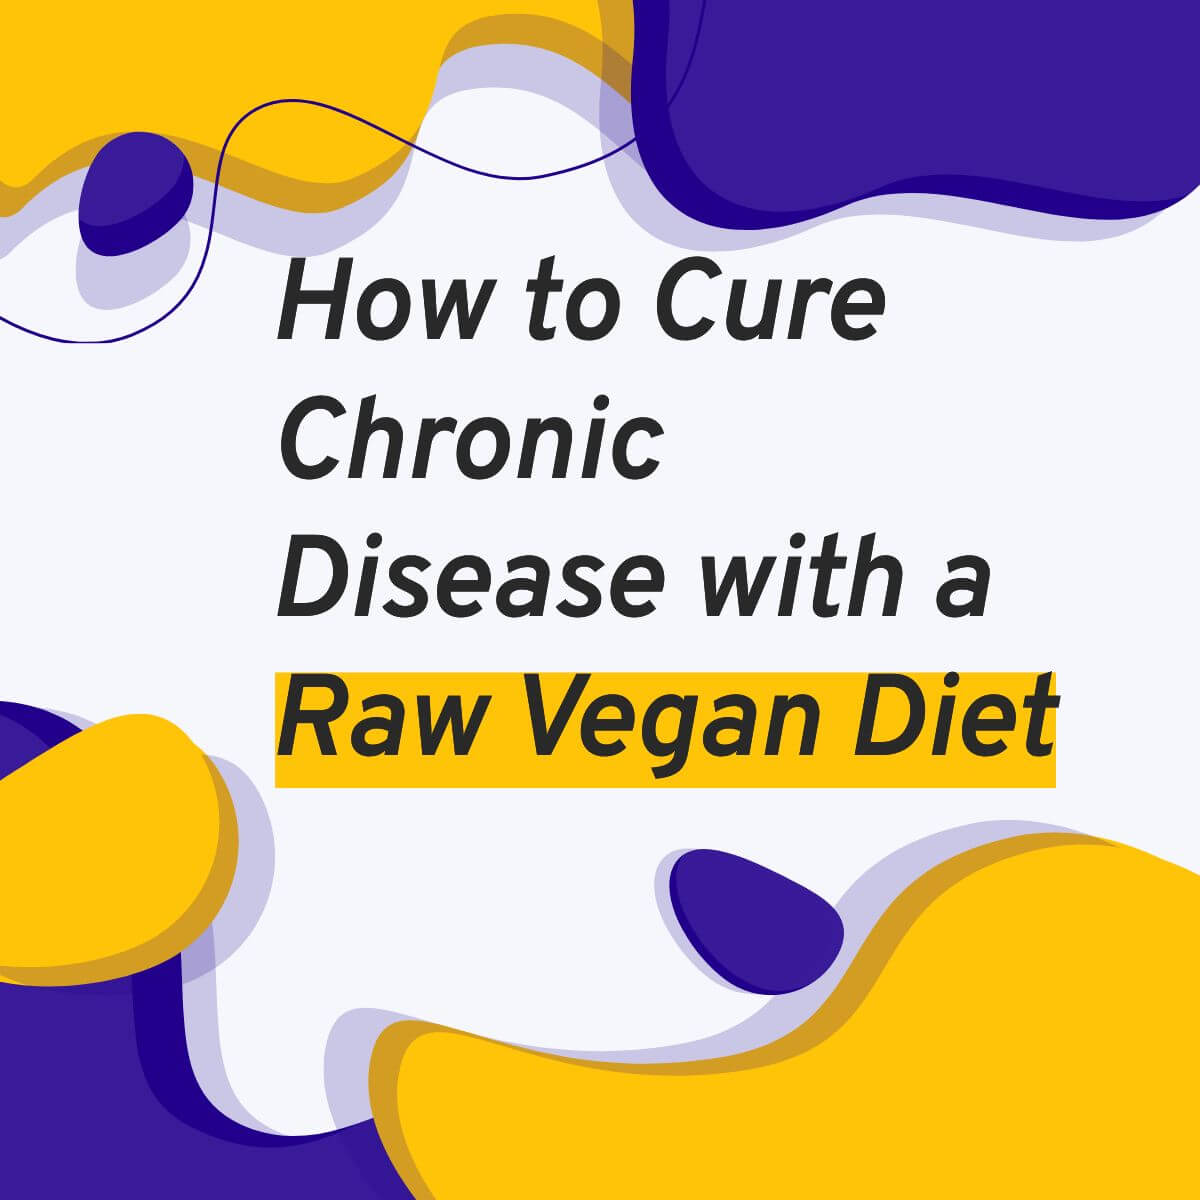 How to Cure Chronic Disease with a Raw Vegan Diet